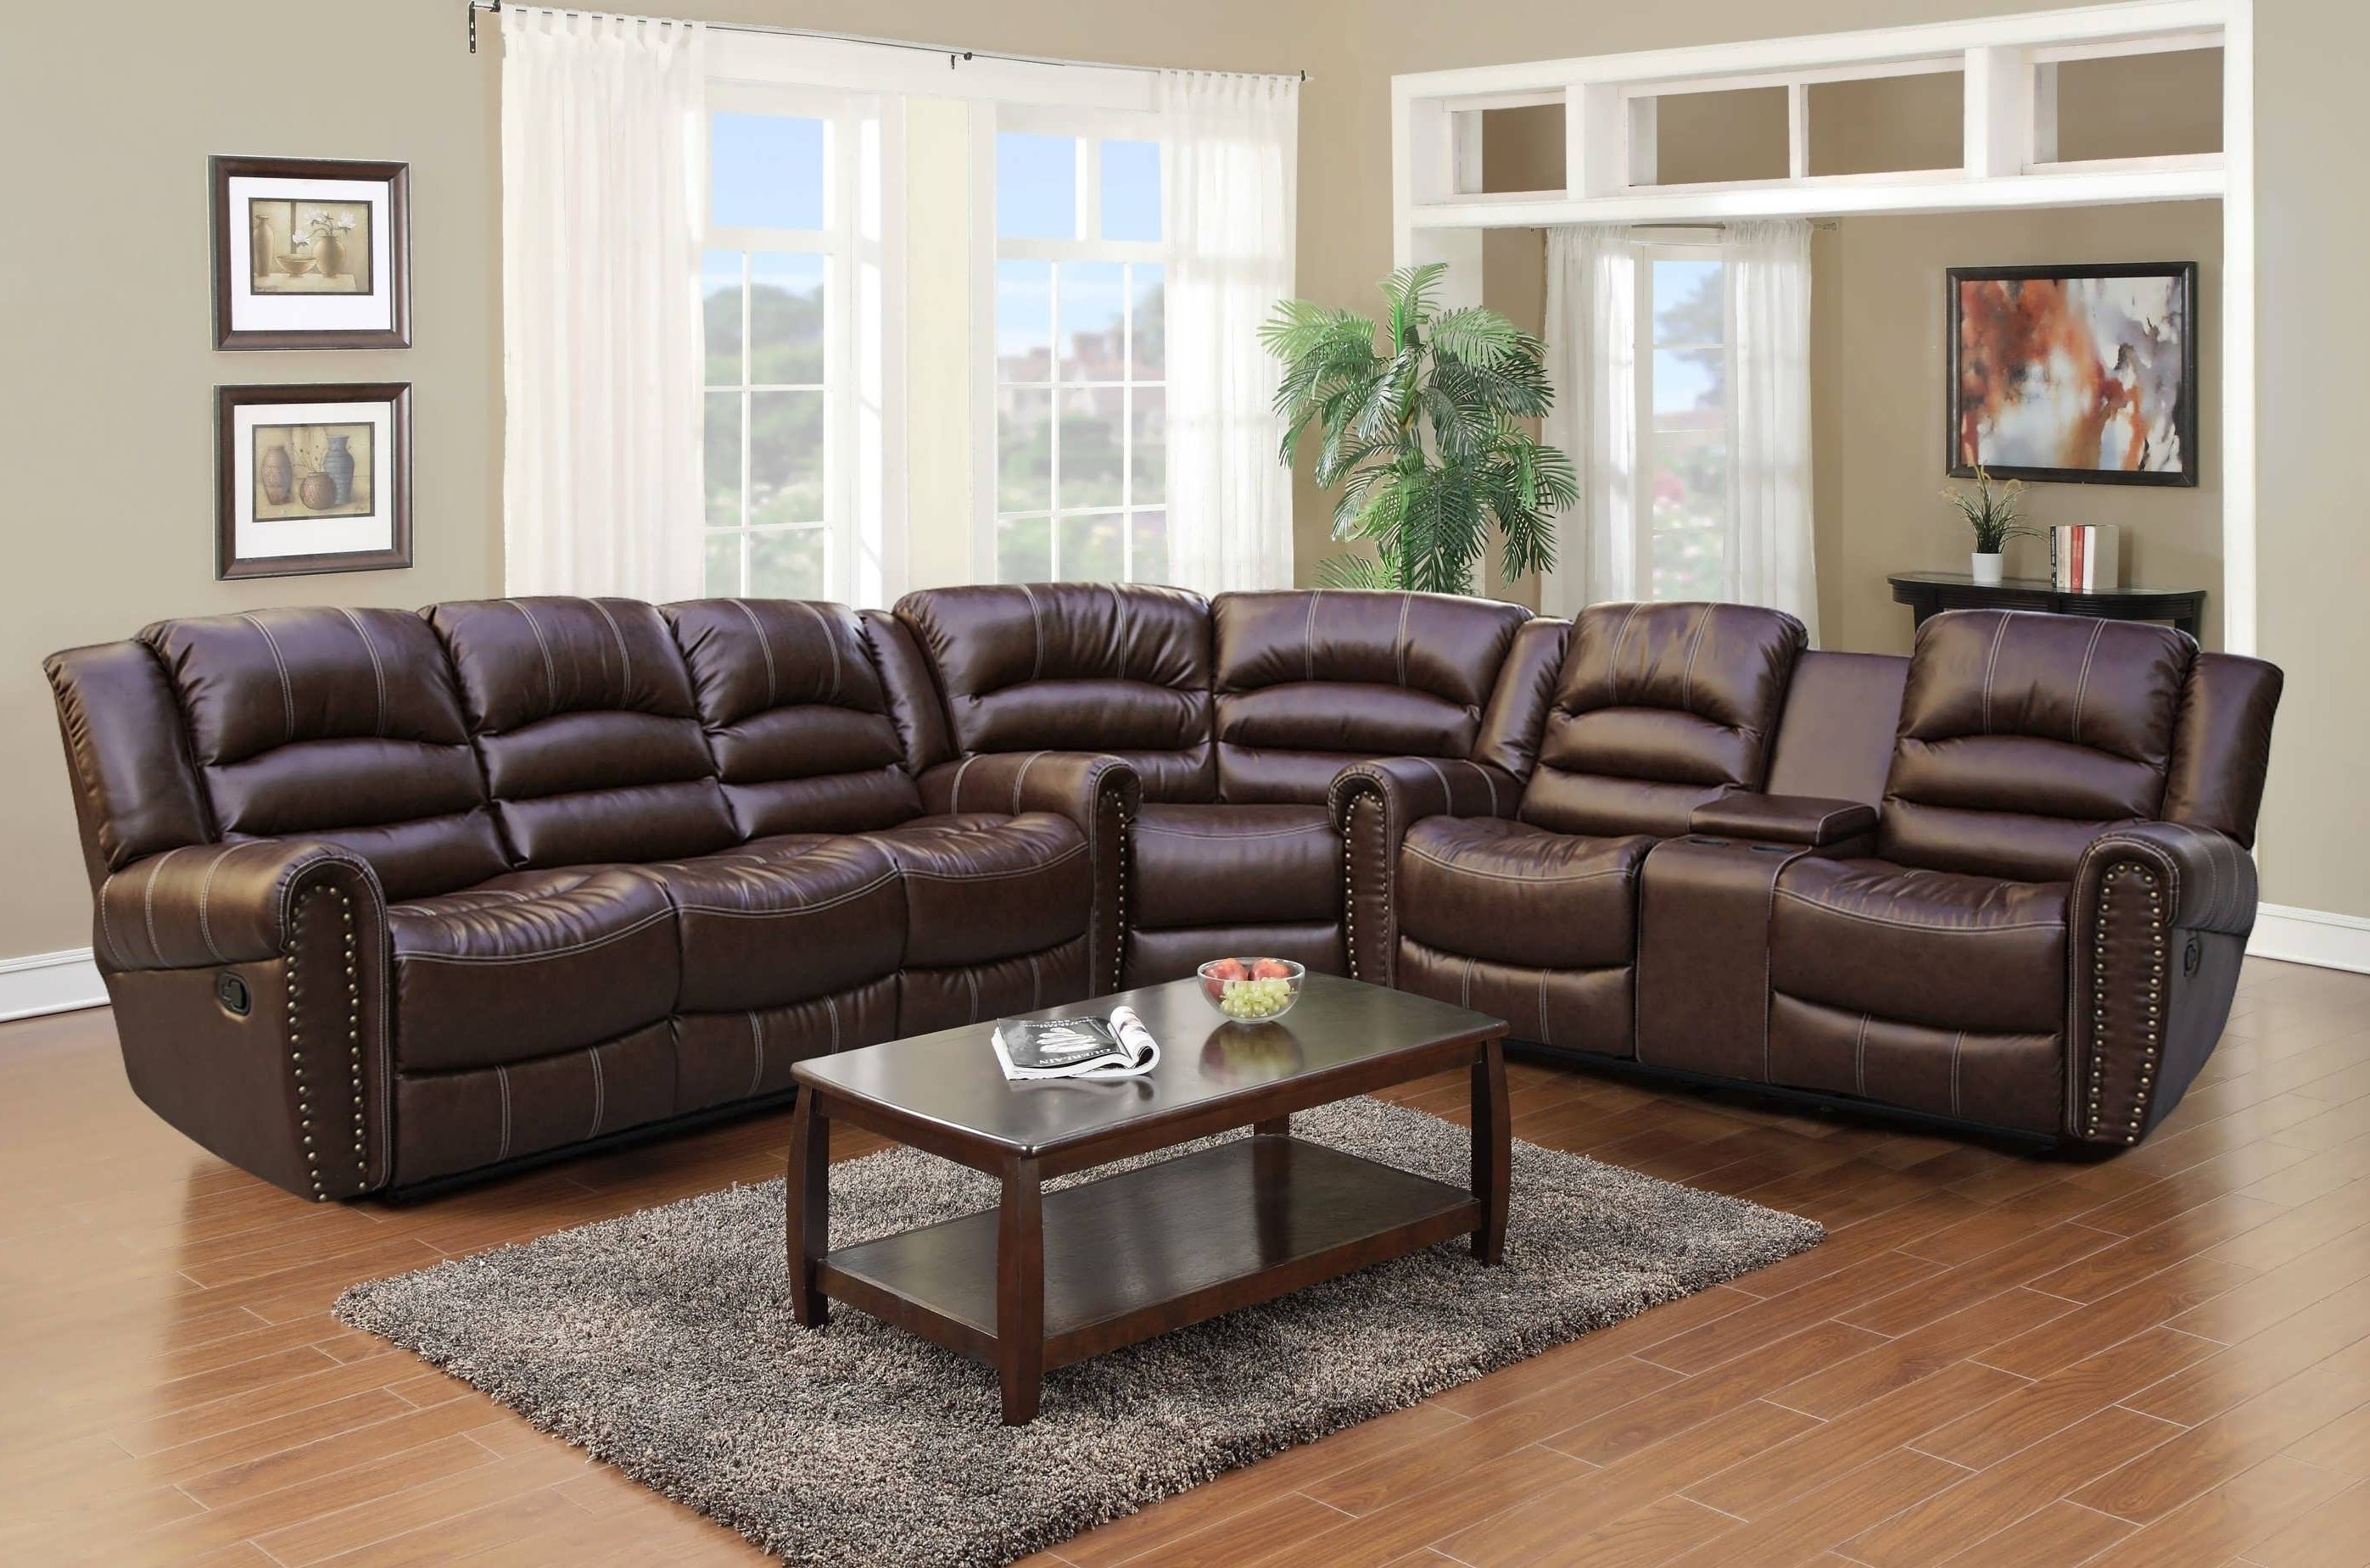 Small Chaise Sectionals Intended For Favorite Sofa : Small Chaise Sofa Leather Sectionals For Sale Grey (View 7 of 15)